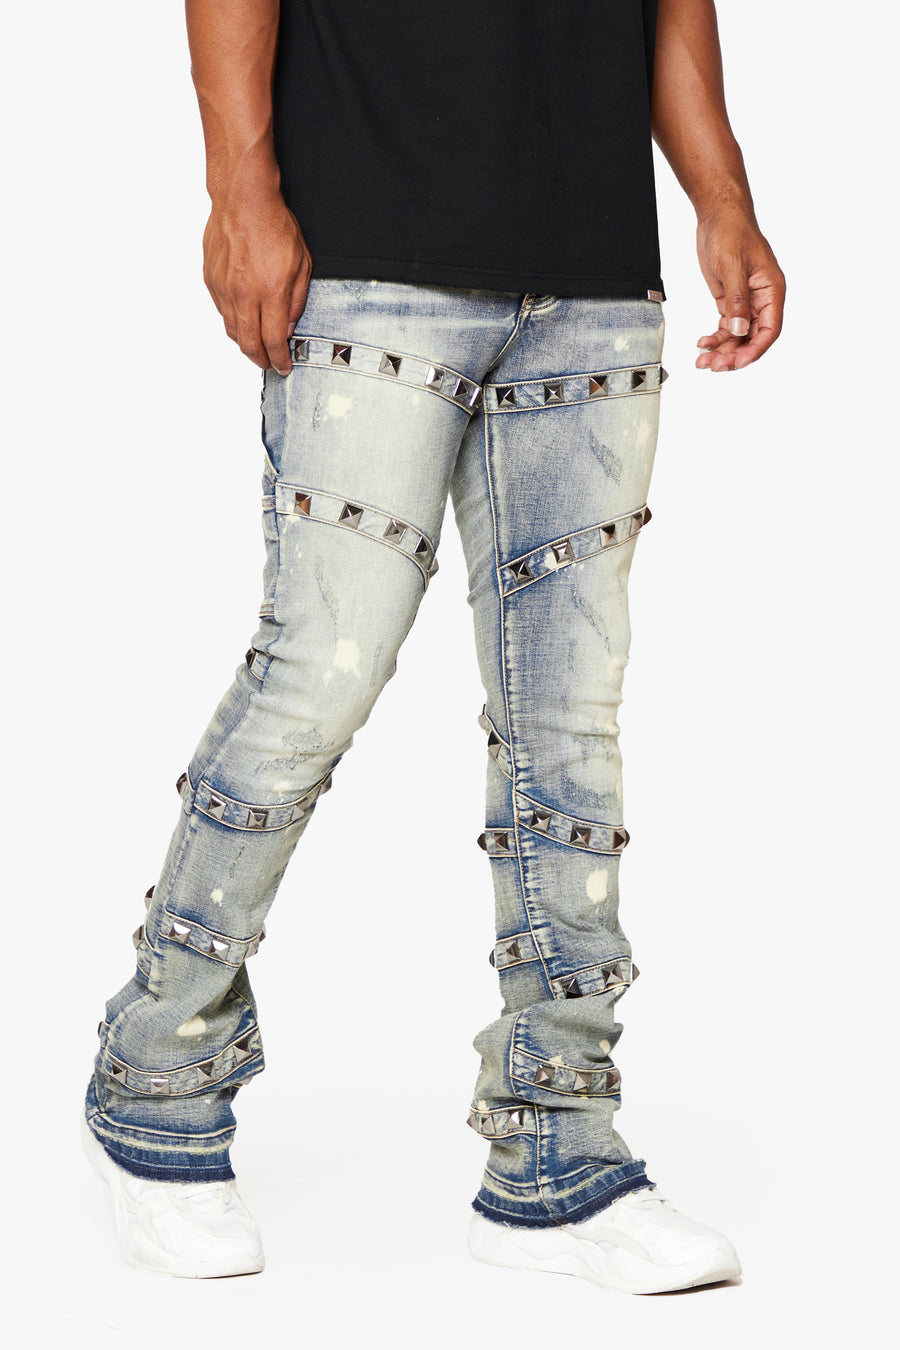 "PYRGOS" BLUE WASH STACKED FLARE JEAN